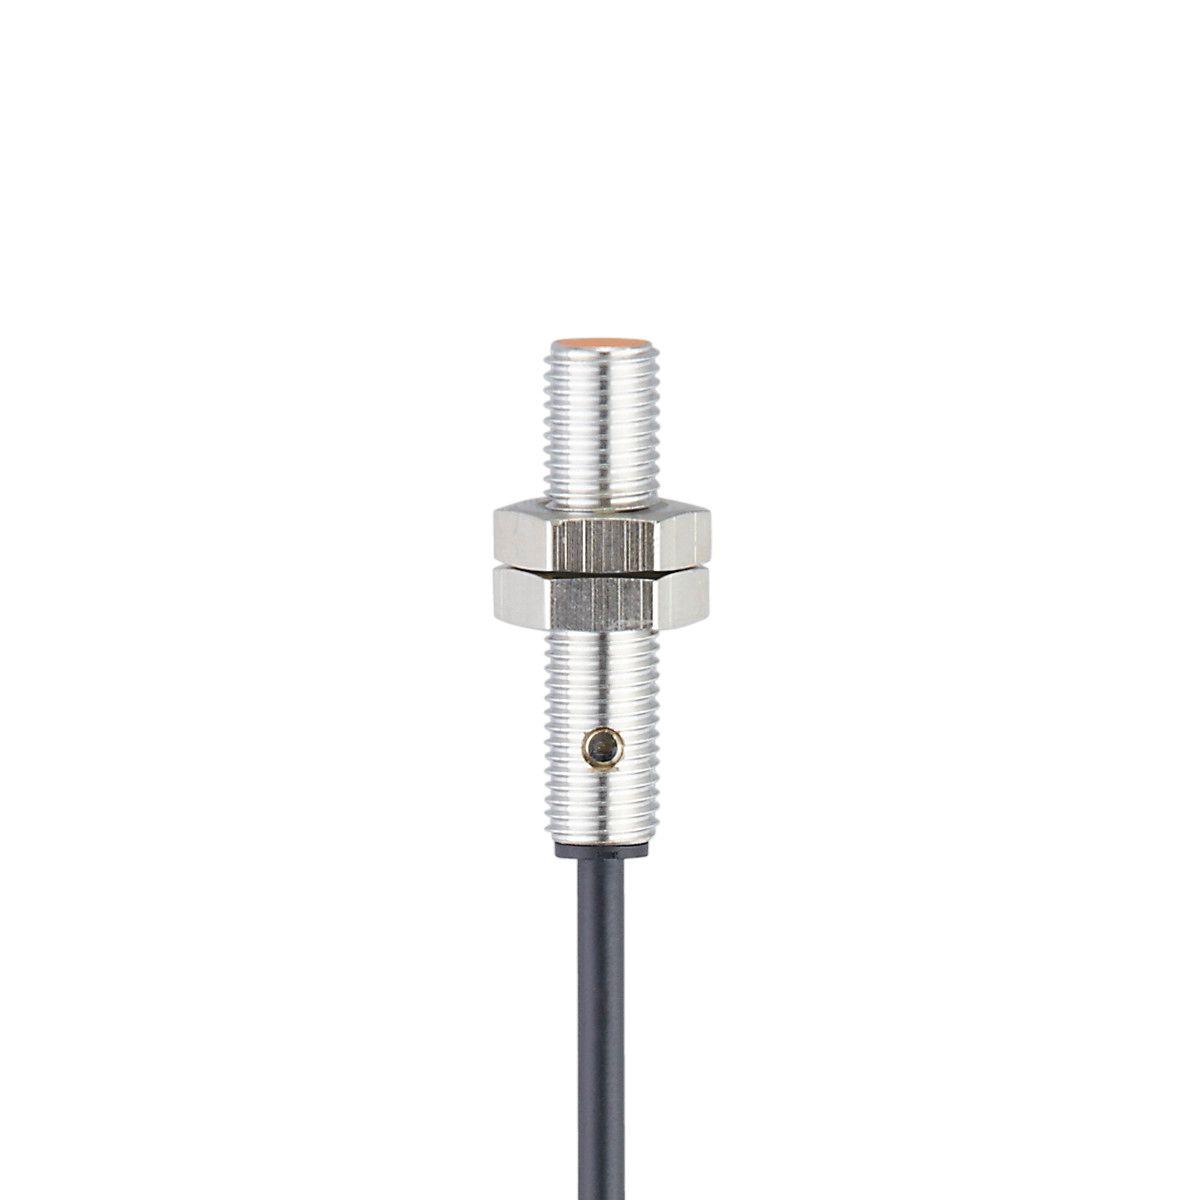 ifm Electronic IE5078 Inductive sensor, Particularly short housing, Electrical design: PNP, Output function: normally closed, Sensing range [mm]: 1, Housing: Threaded type, Dimensions [mm]: M8 x 1 / L = 35